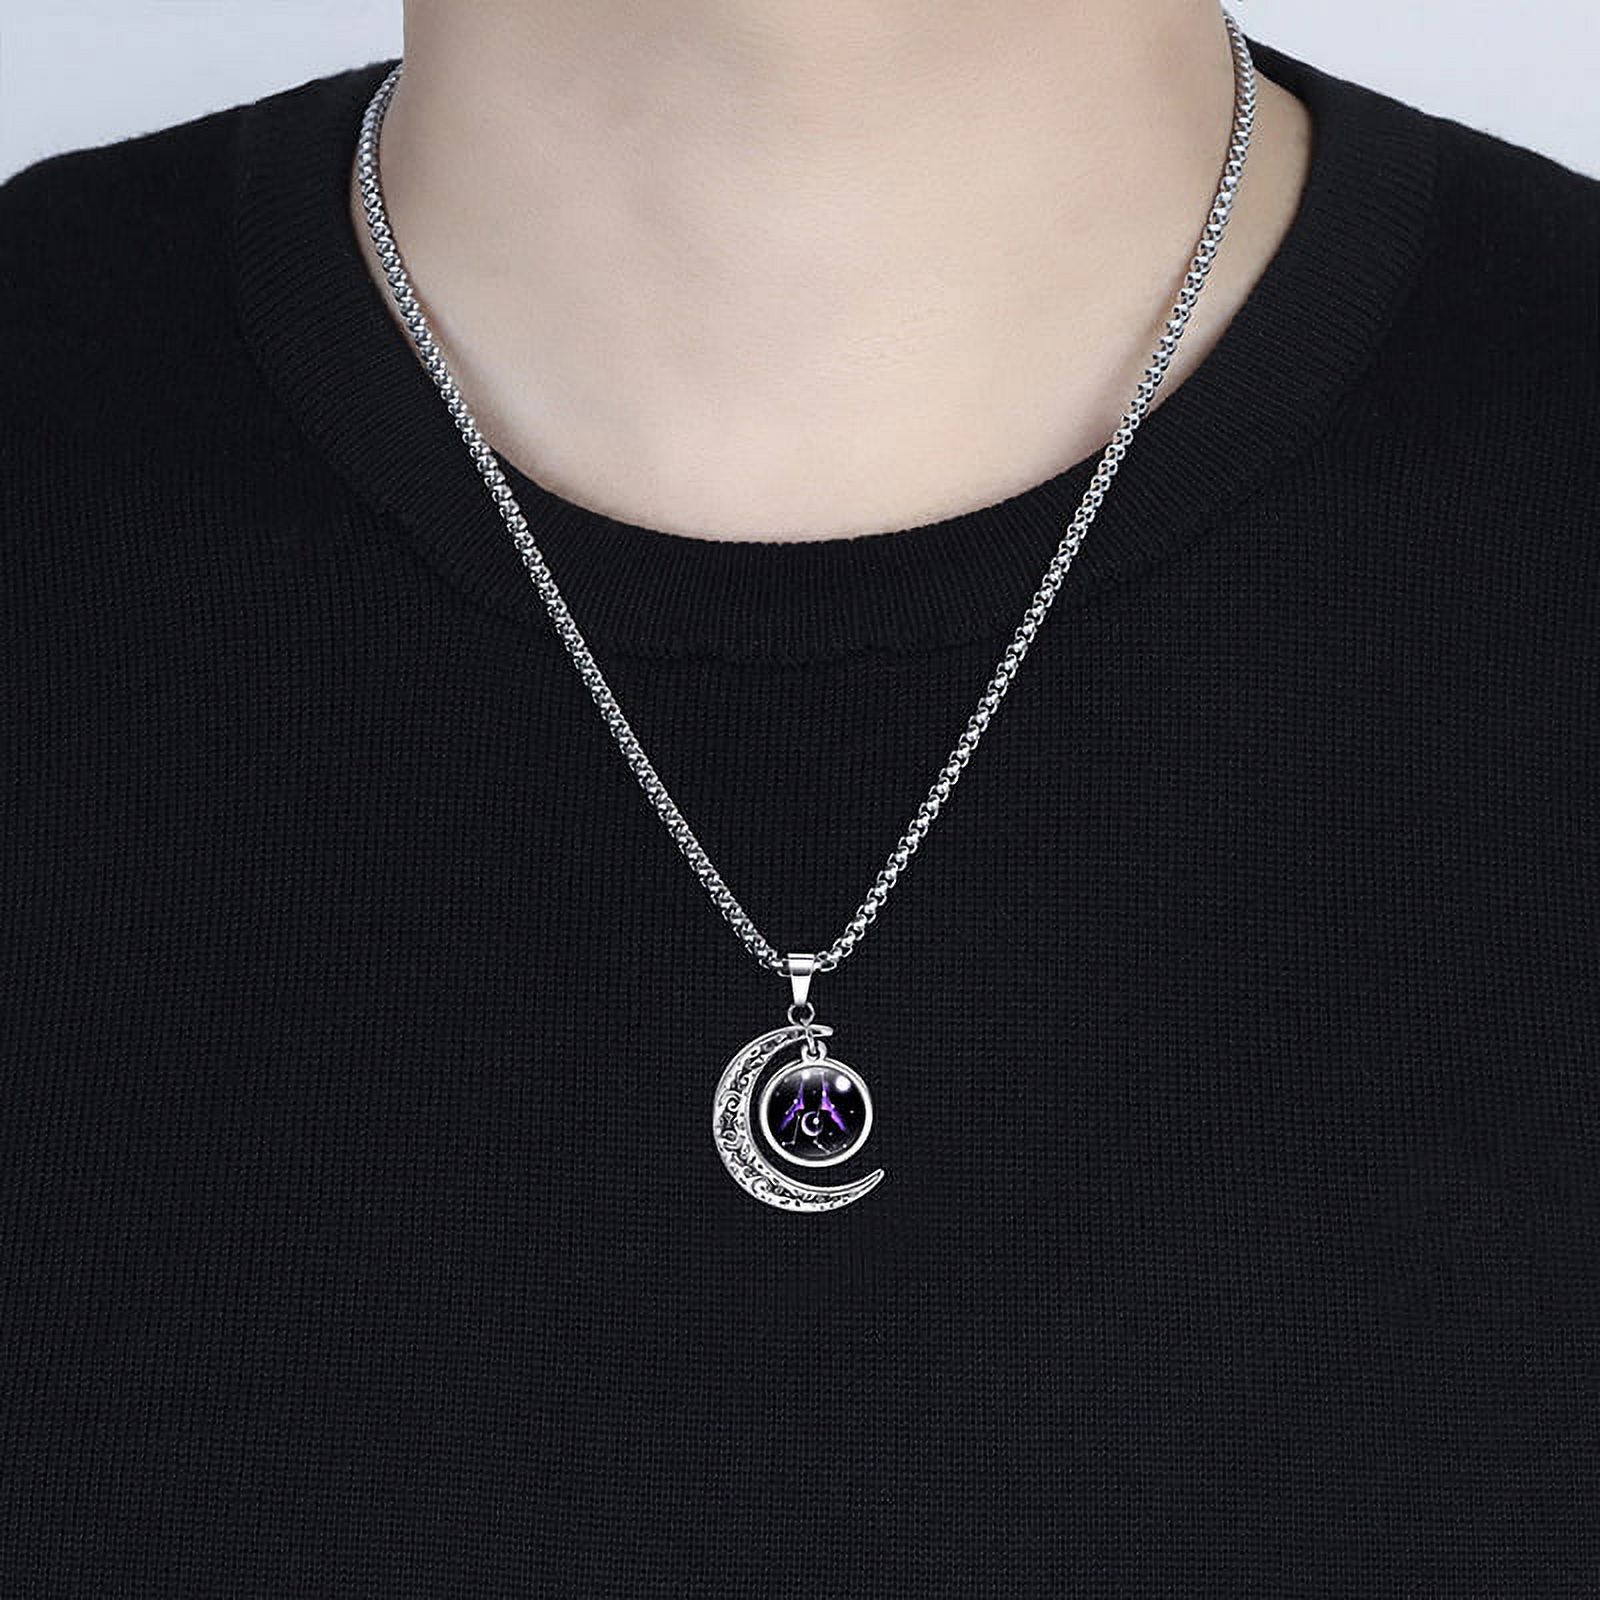 JUSTUP Wekity Stainless Steel Crescent Moon 12 Constellation Zodiac Sign Luminous Pendant Necklace Glow in The Dark,Cancer - image 2 of 4